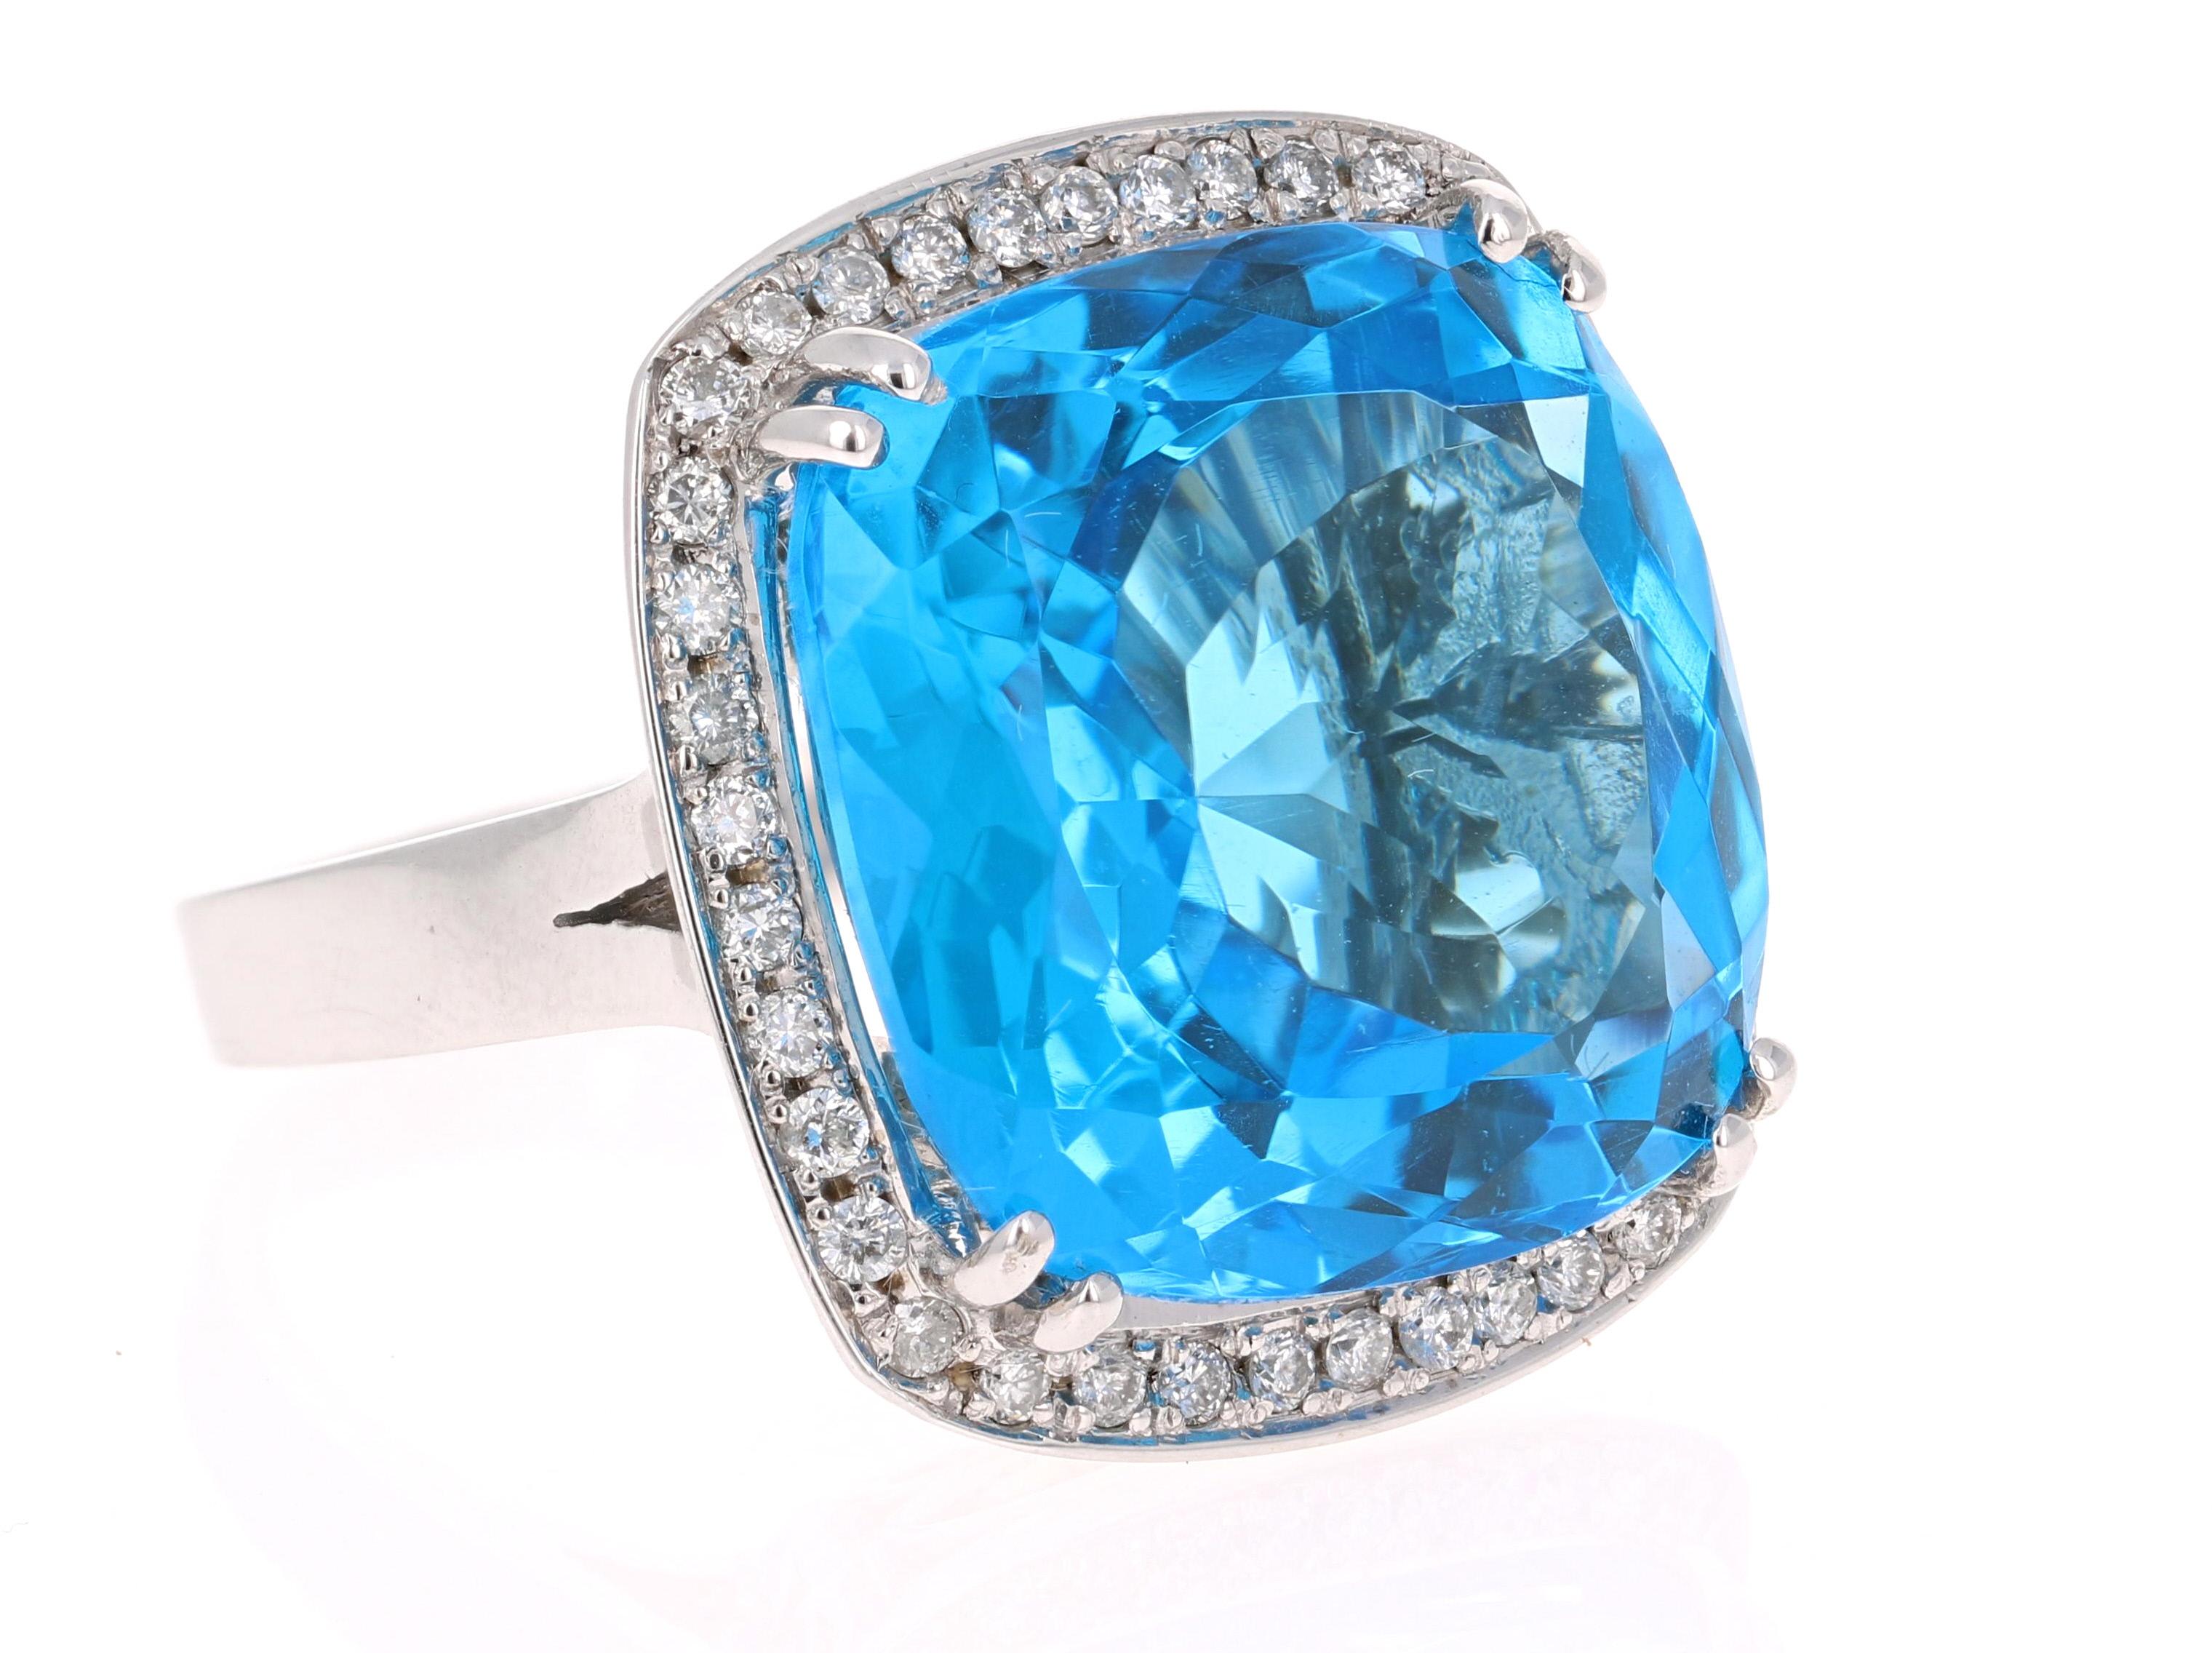 This stunning statement ring has a large Cushion Cut Blue Topaz that weighs 38.19 Carats. 
It is surrounded by a simple halo of 36 Round Cut Diamonds that weigh 0.63 Carats. The clarity and color of the diamonds are SI-F. 

It is crafted in 14 Karat